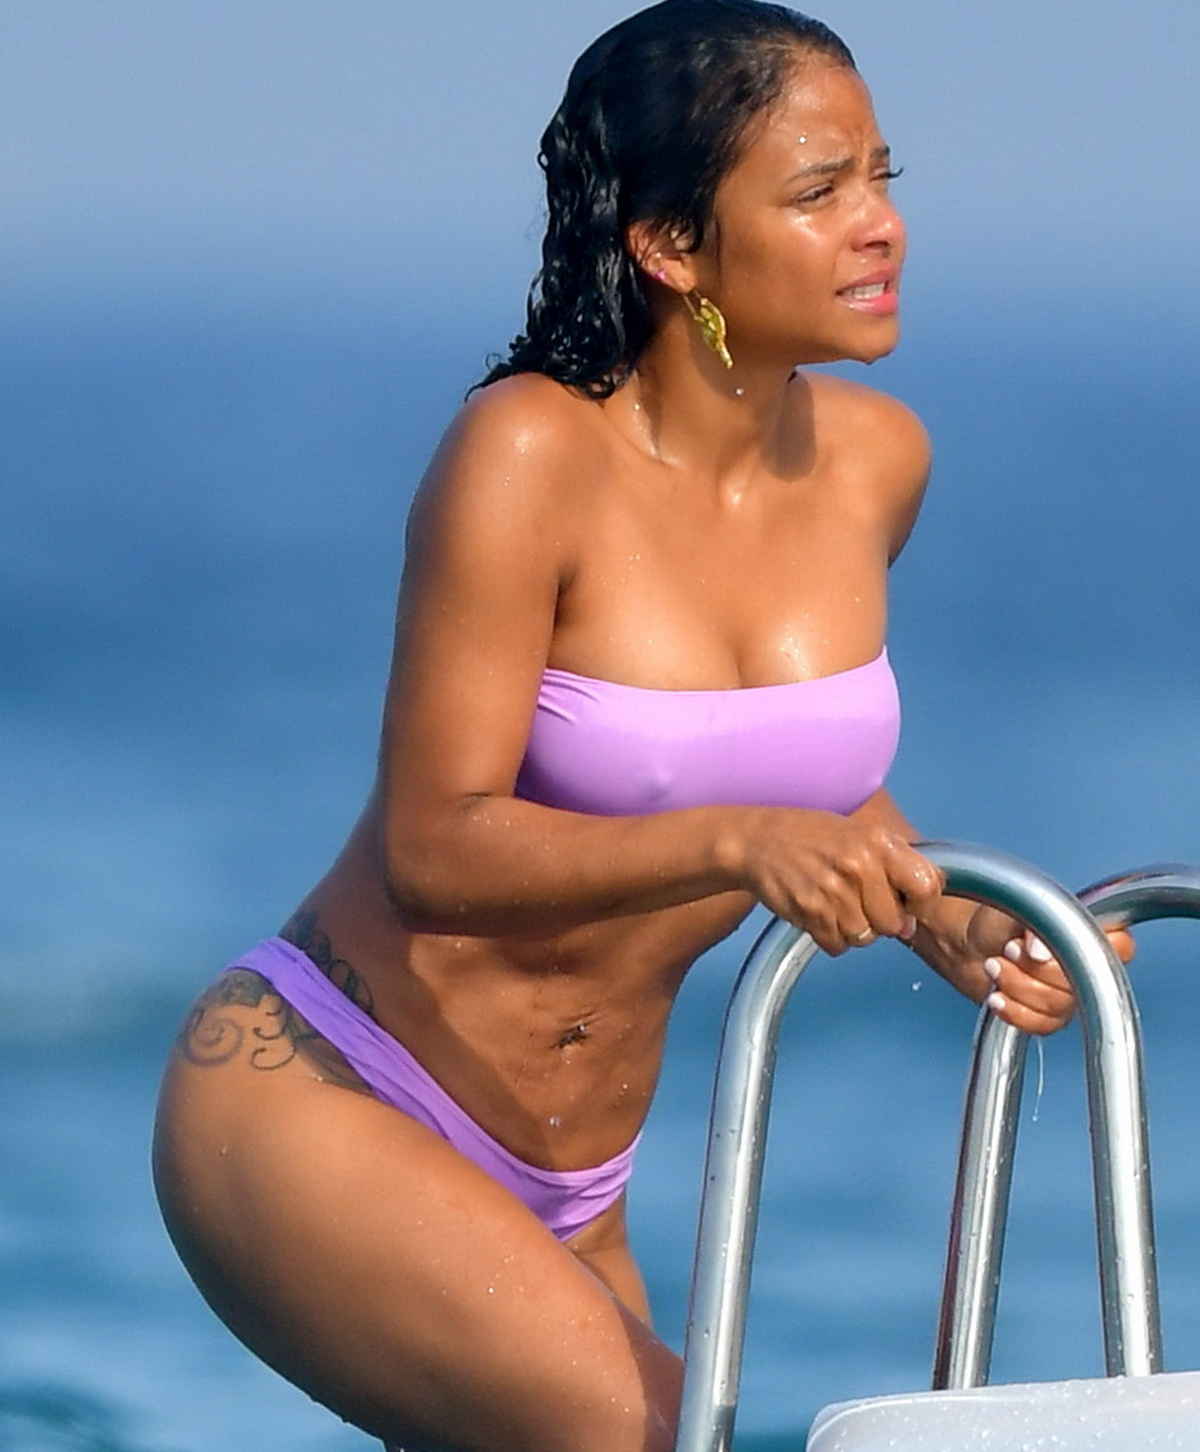 Christina Milian pokies and cameltoe in sexy bikini candids on a boat during holiday UHQ (6).jpg